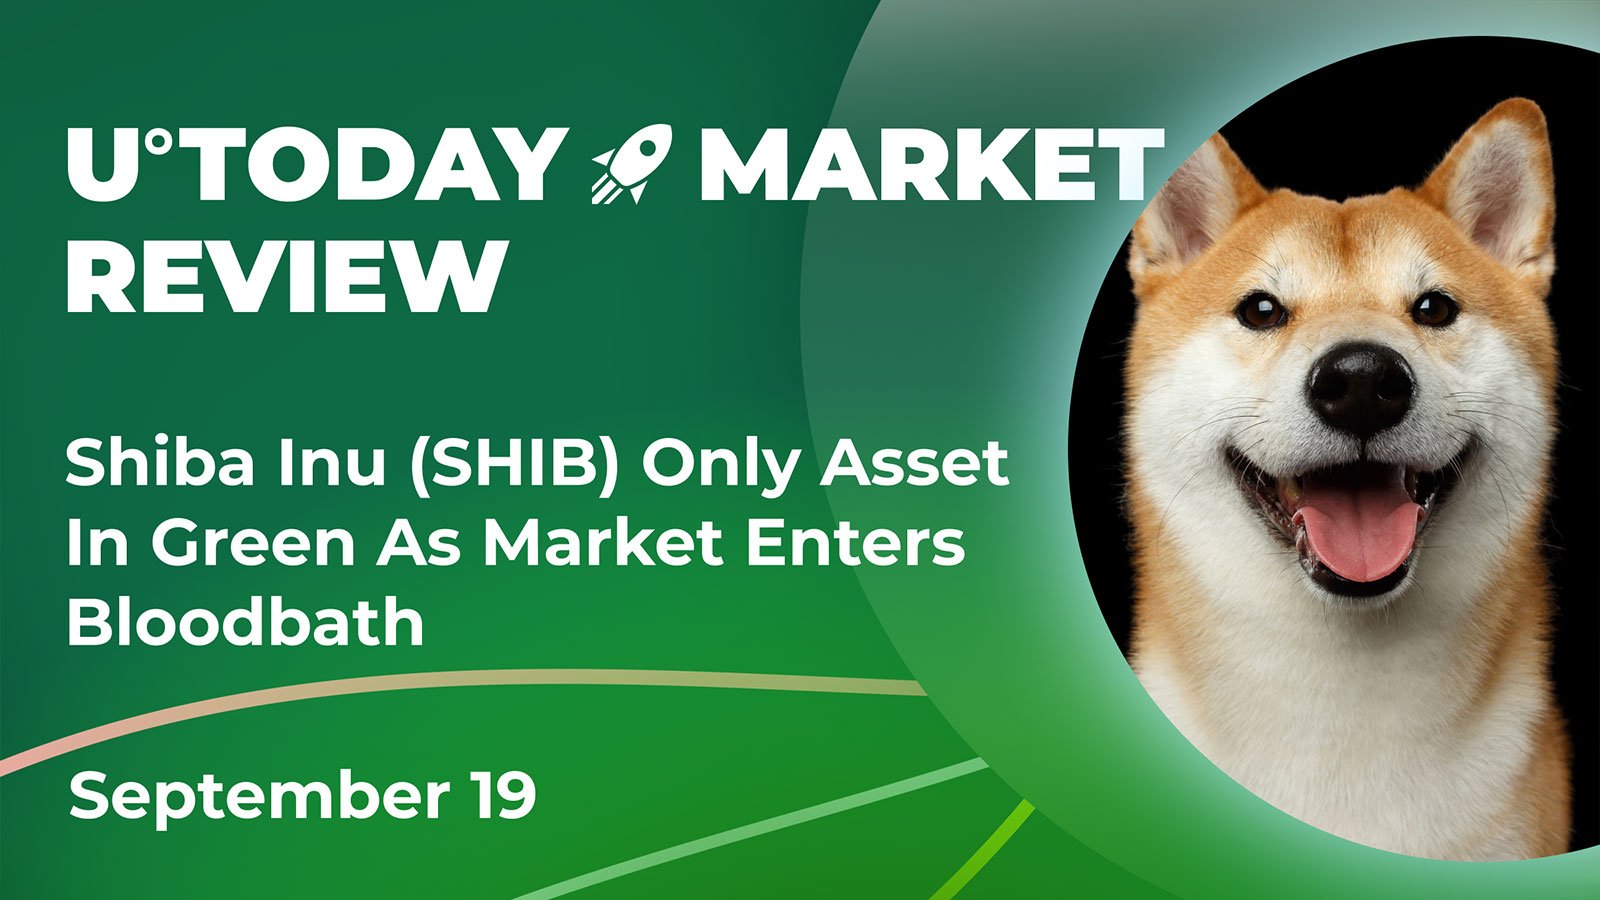 Shiba Inu (SHIB) Only Asset In Green As Market Enters Bloodbath: Crypto Market Review, September 19